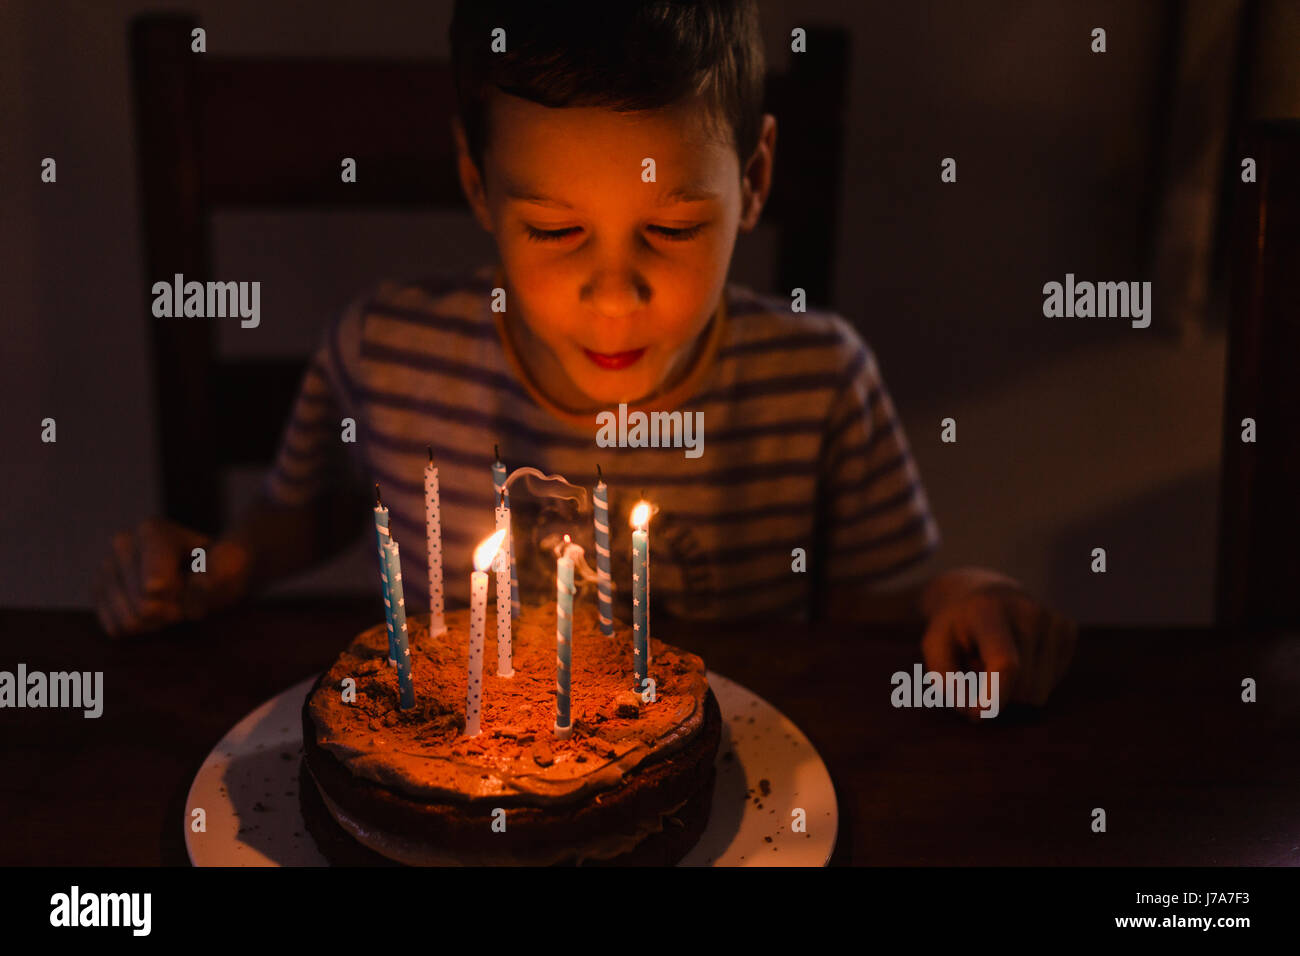 Boy blowing out burning candles on his birthday cake Stock Photo